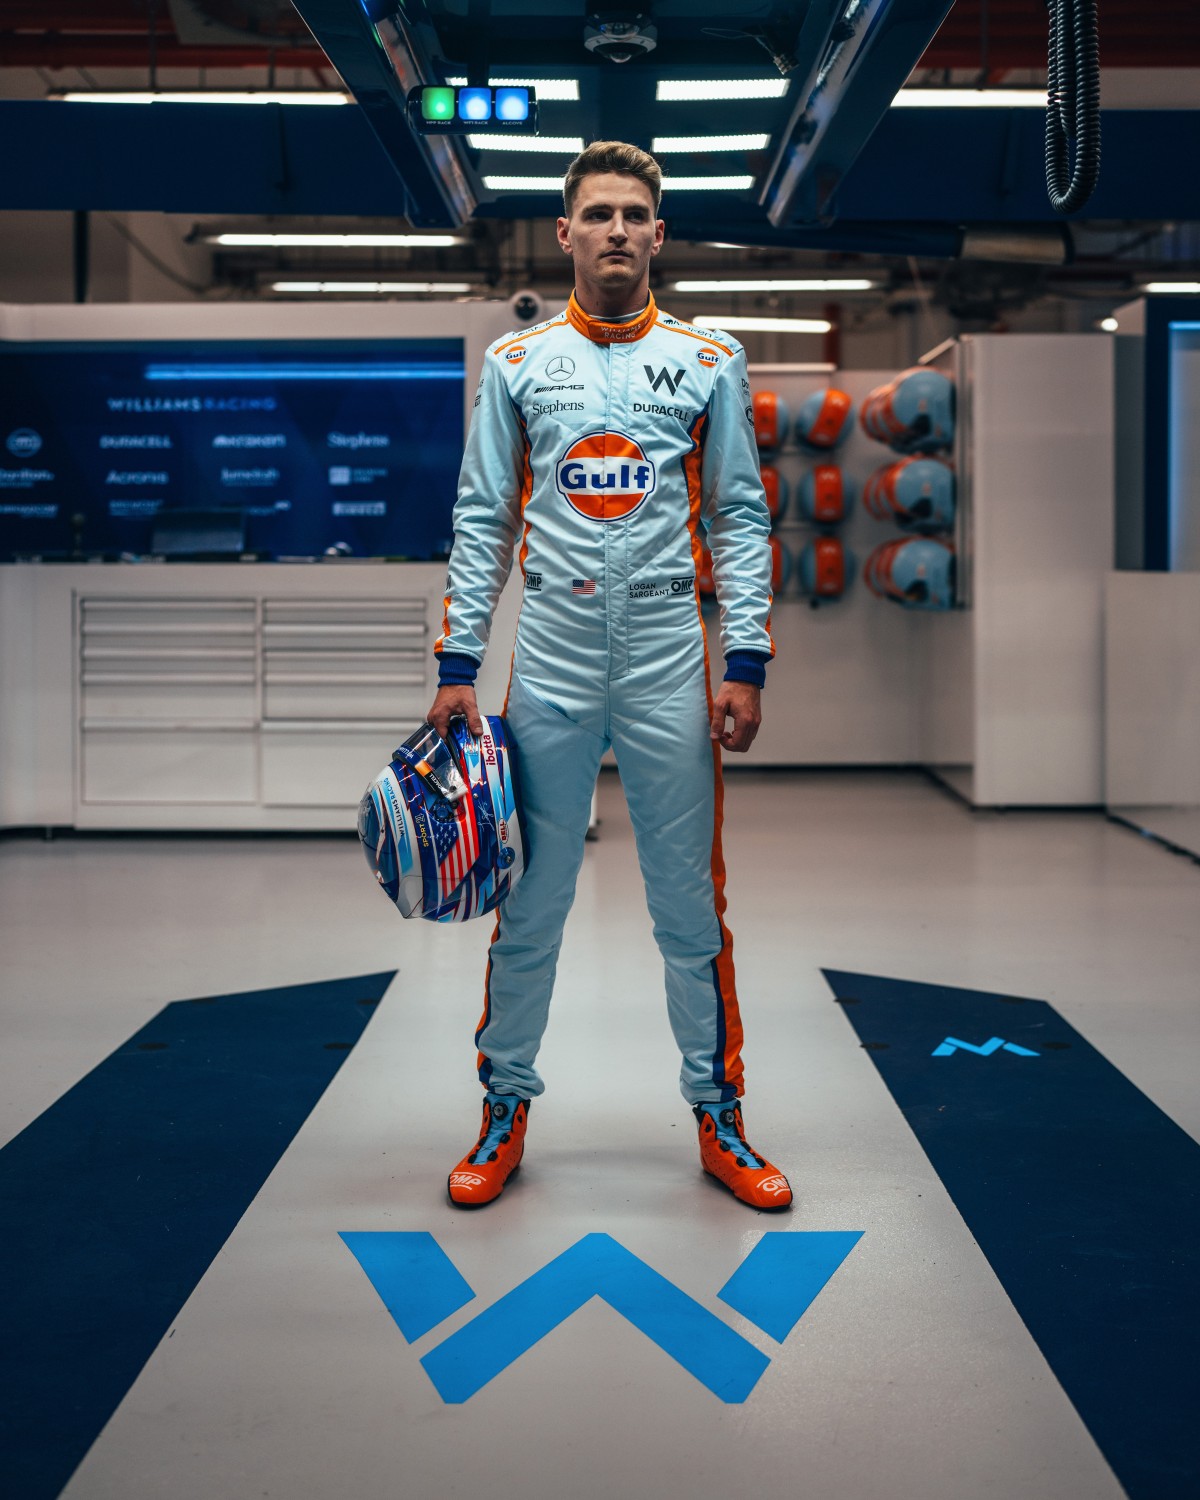 Gulf Oil International and Williams Racing Announce F1 Fan Voted Livery